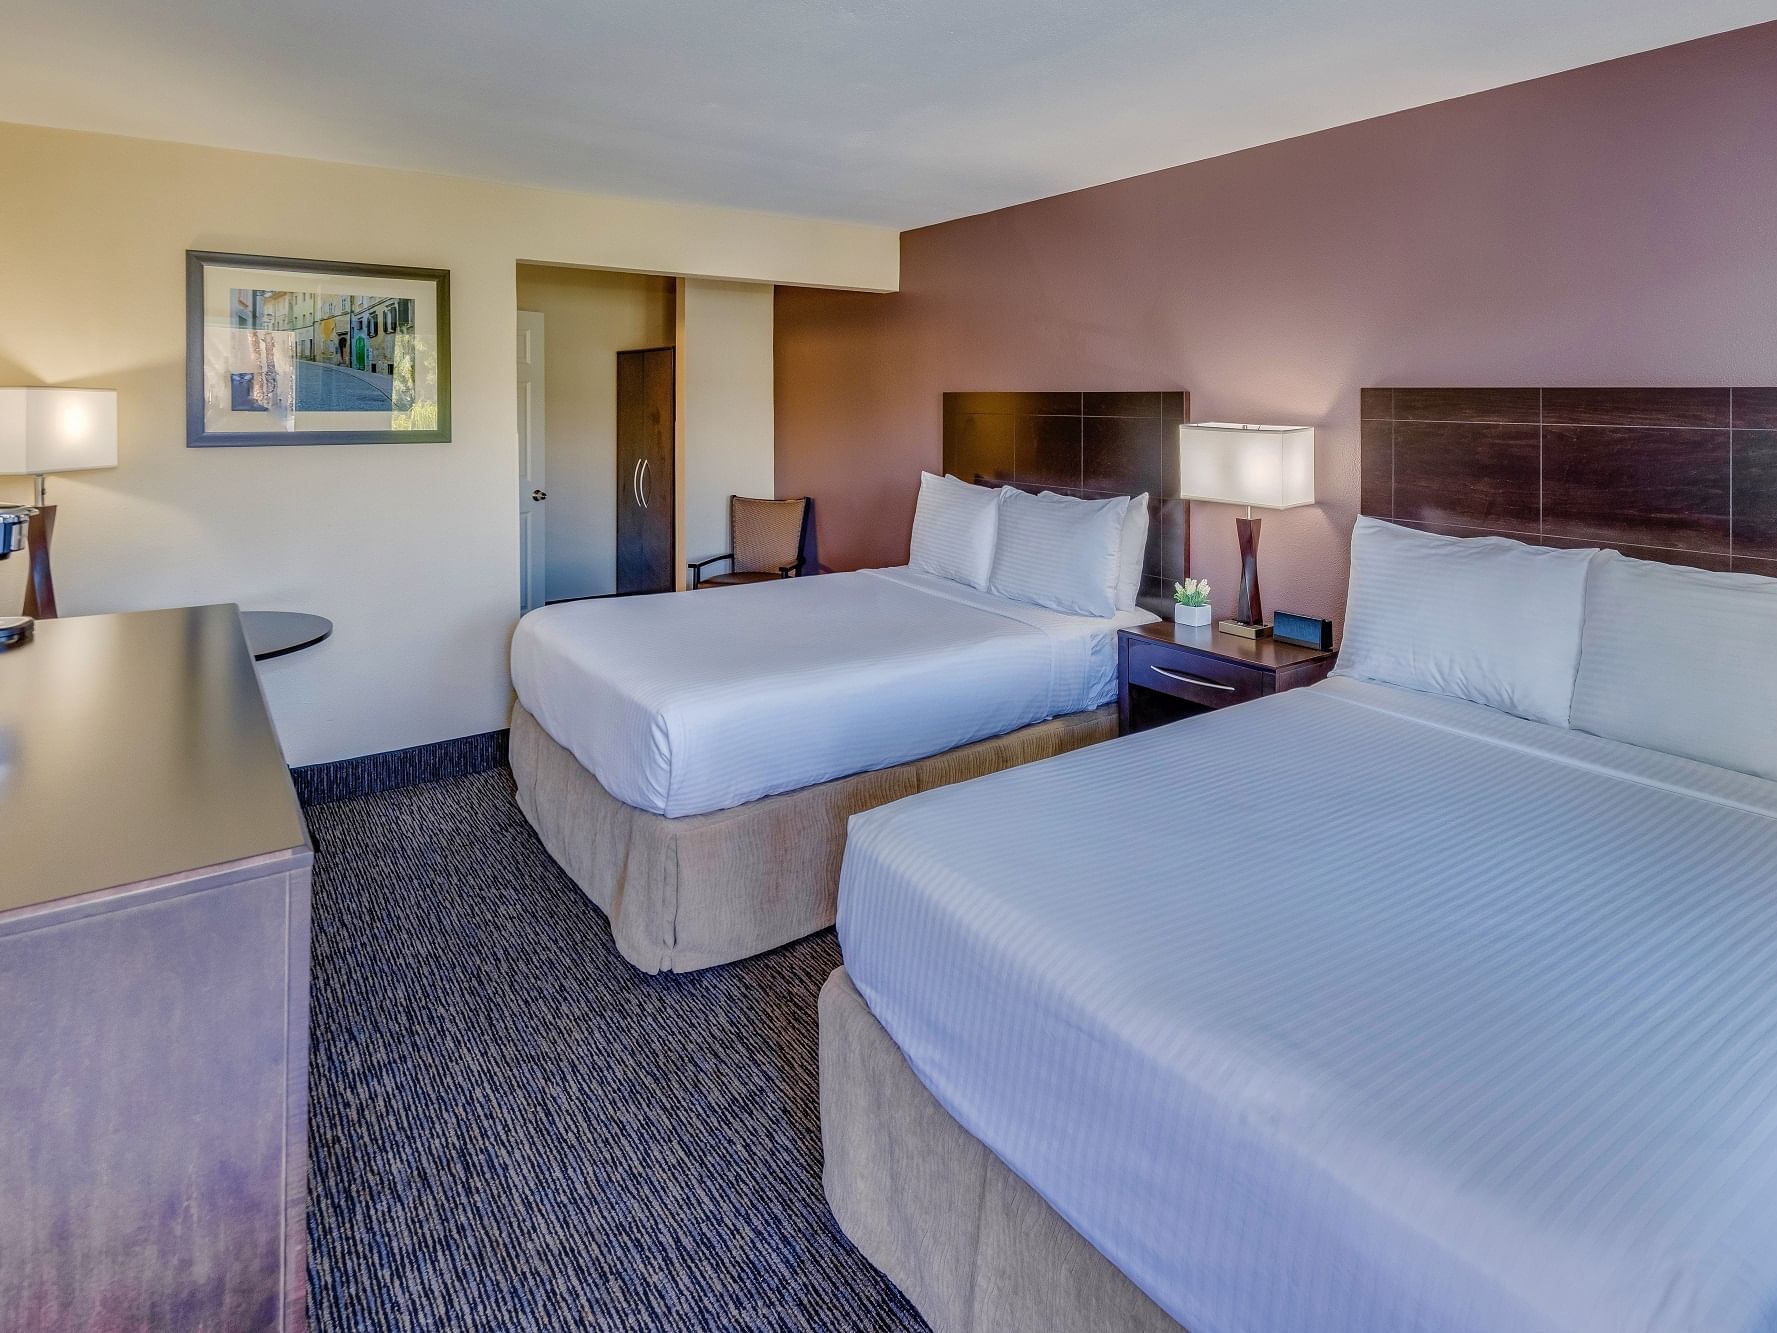 Classic Room with two beds at Grand Legacy at The Park Anaheim.